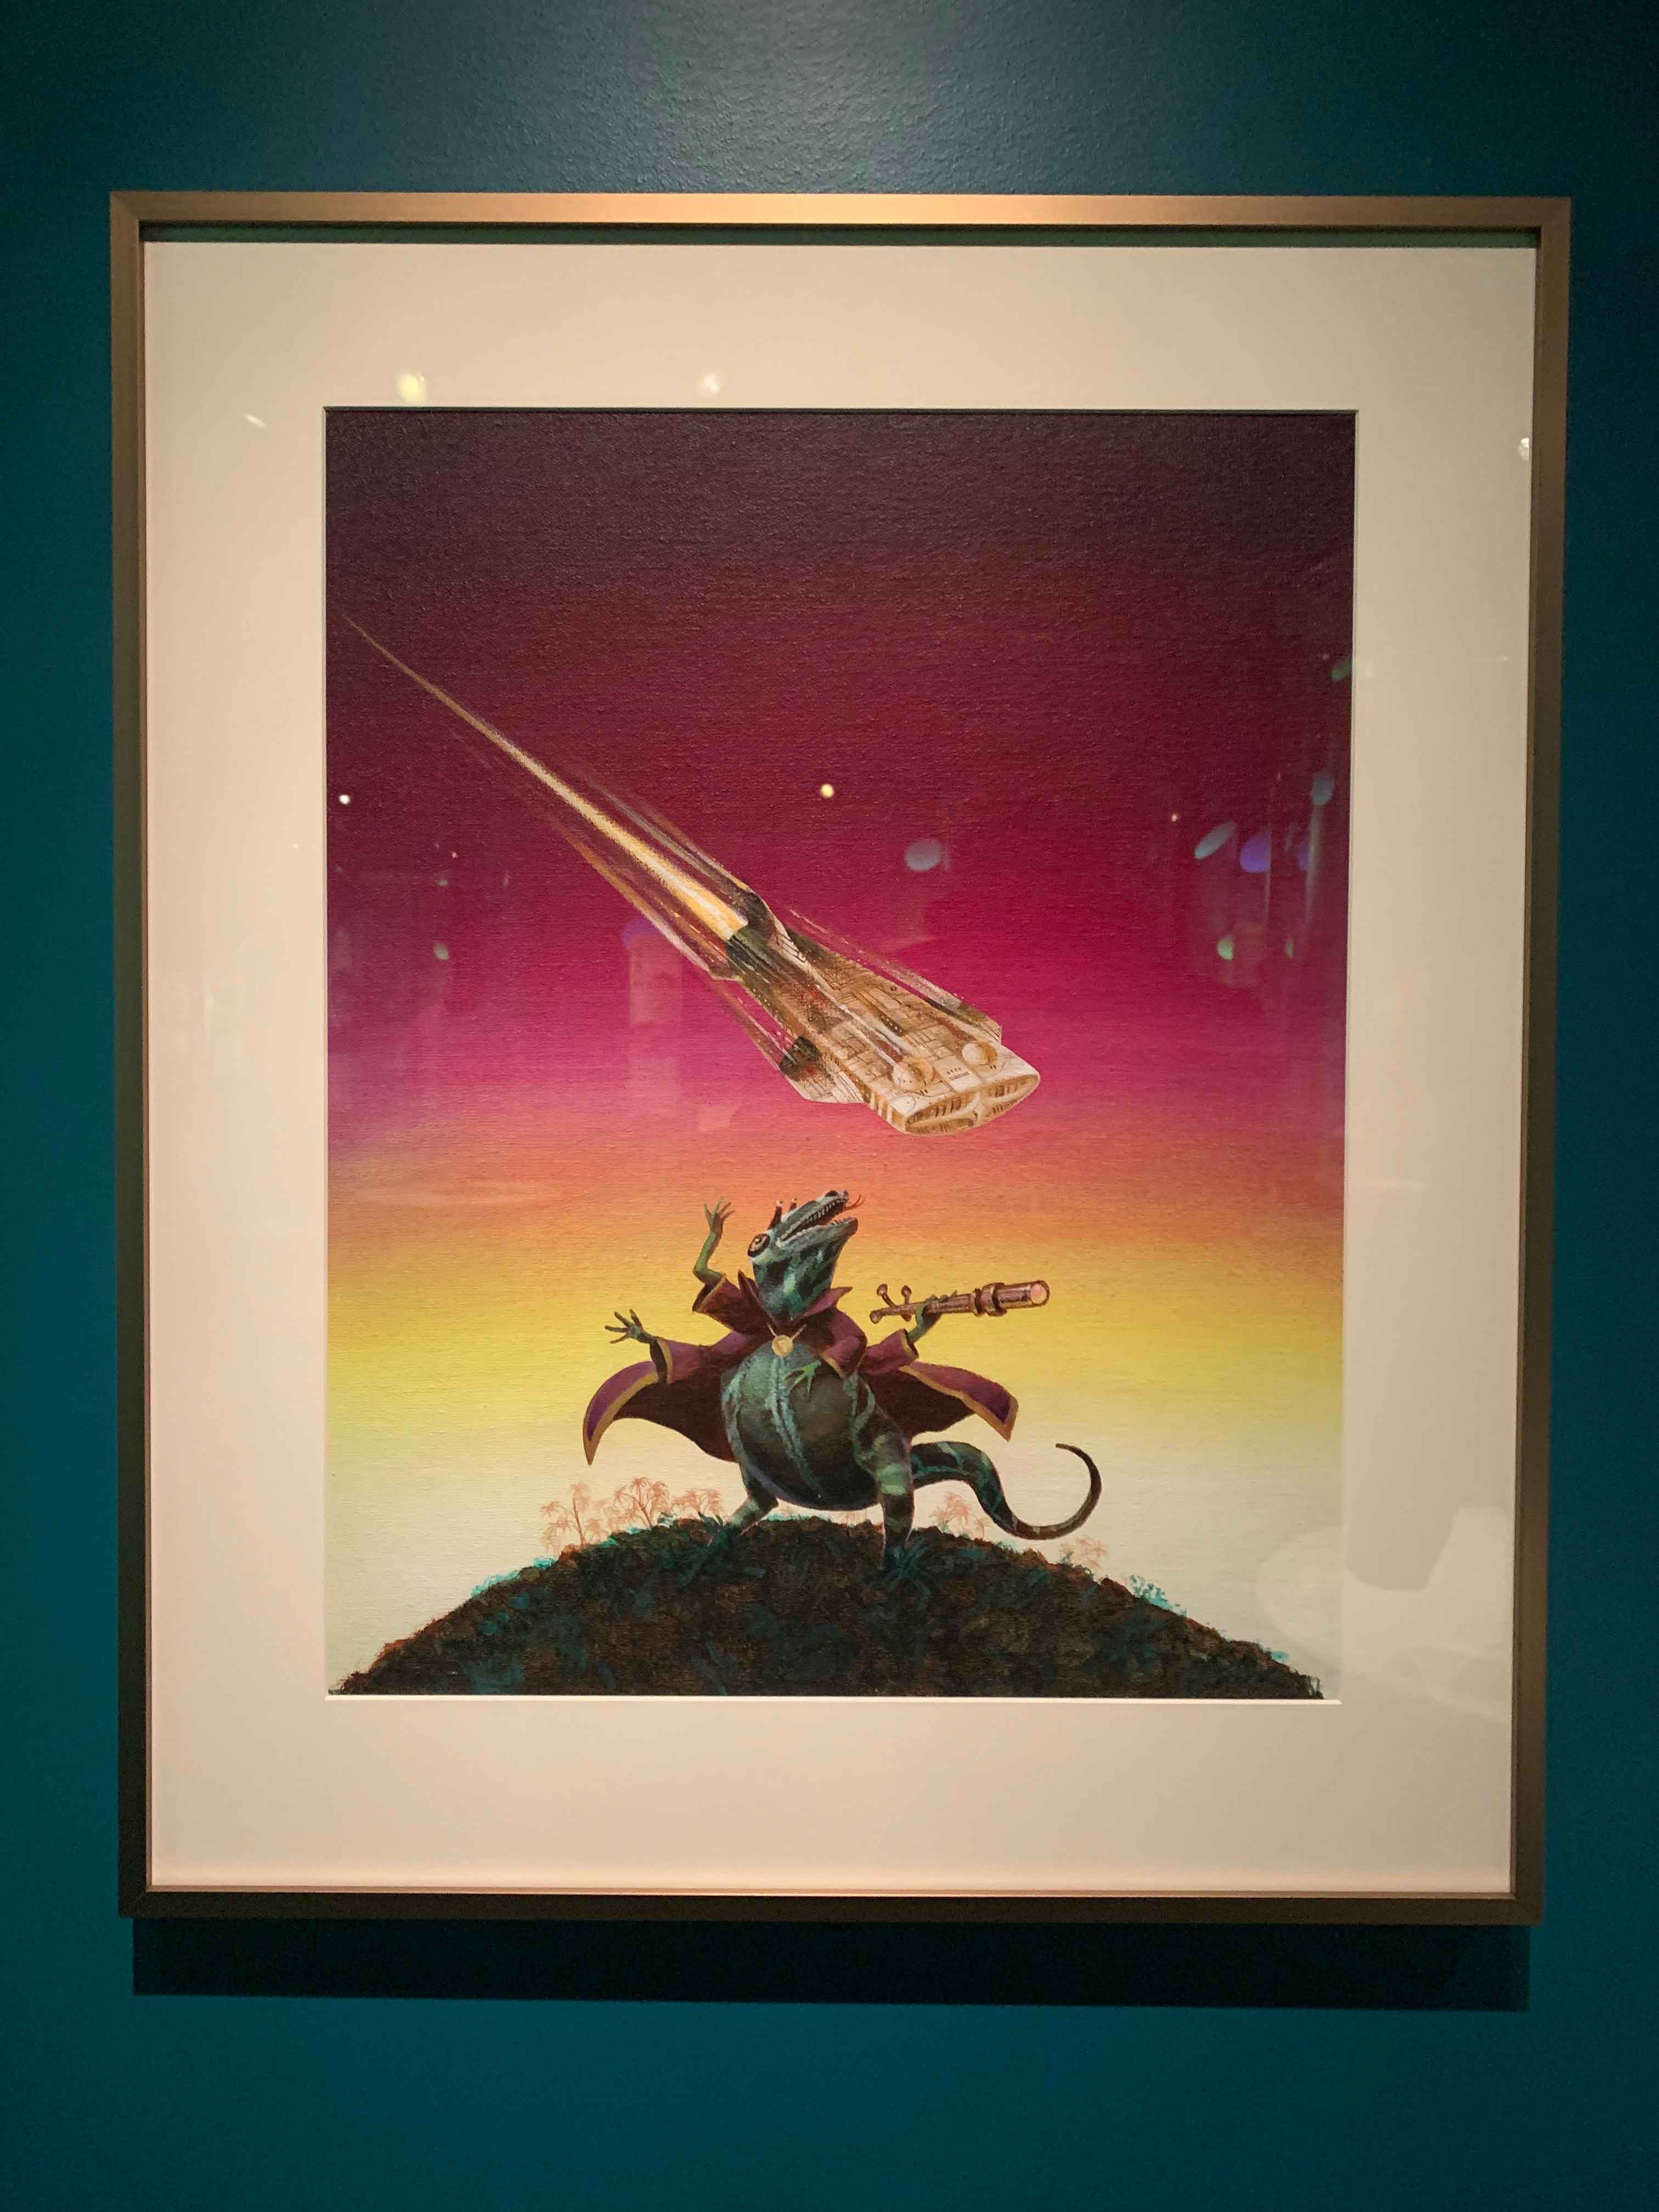 Jack Gaughan's "Hostages of Zark" Cover Art for 1984 Issues of 'Analog Science Fiction/Science Fact' Magazine Added to MoPOP's 'Science Fiction and Fantasy Hall of Fame' Exhibition